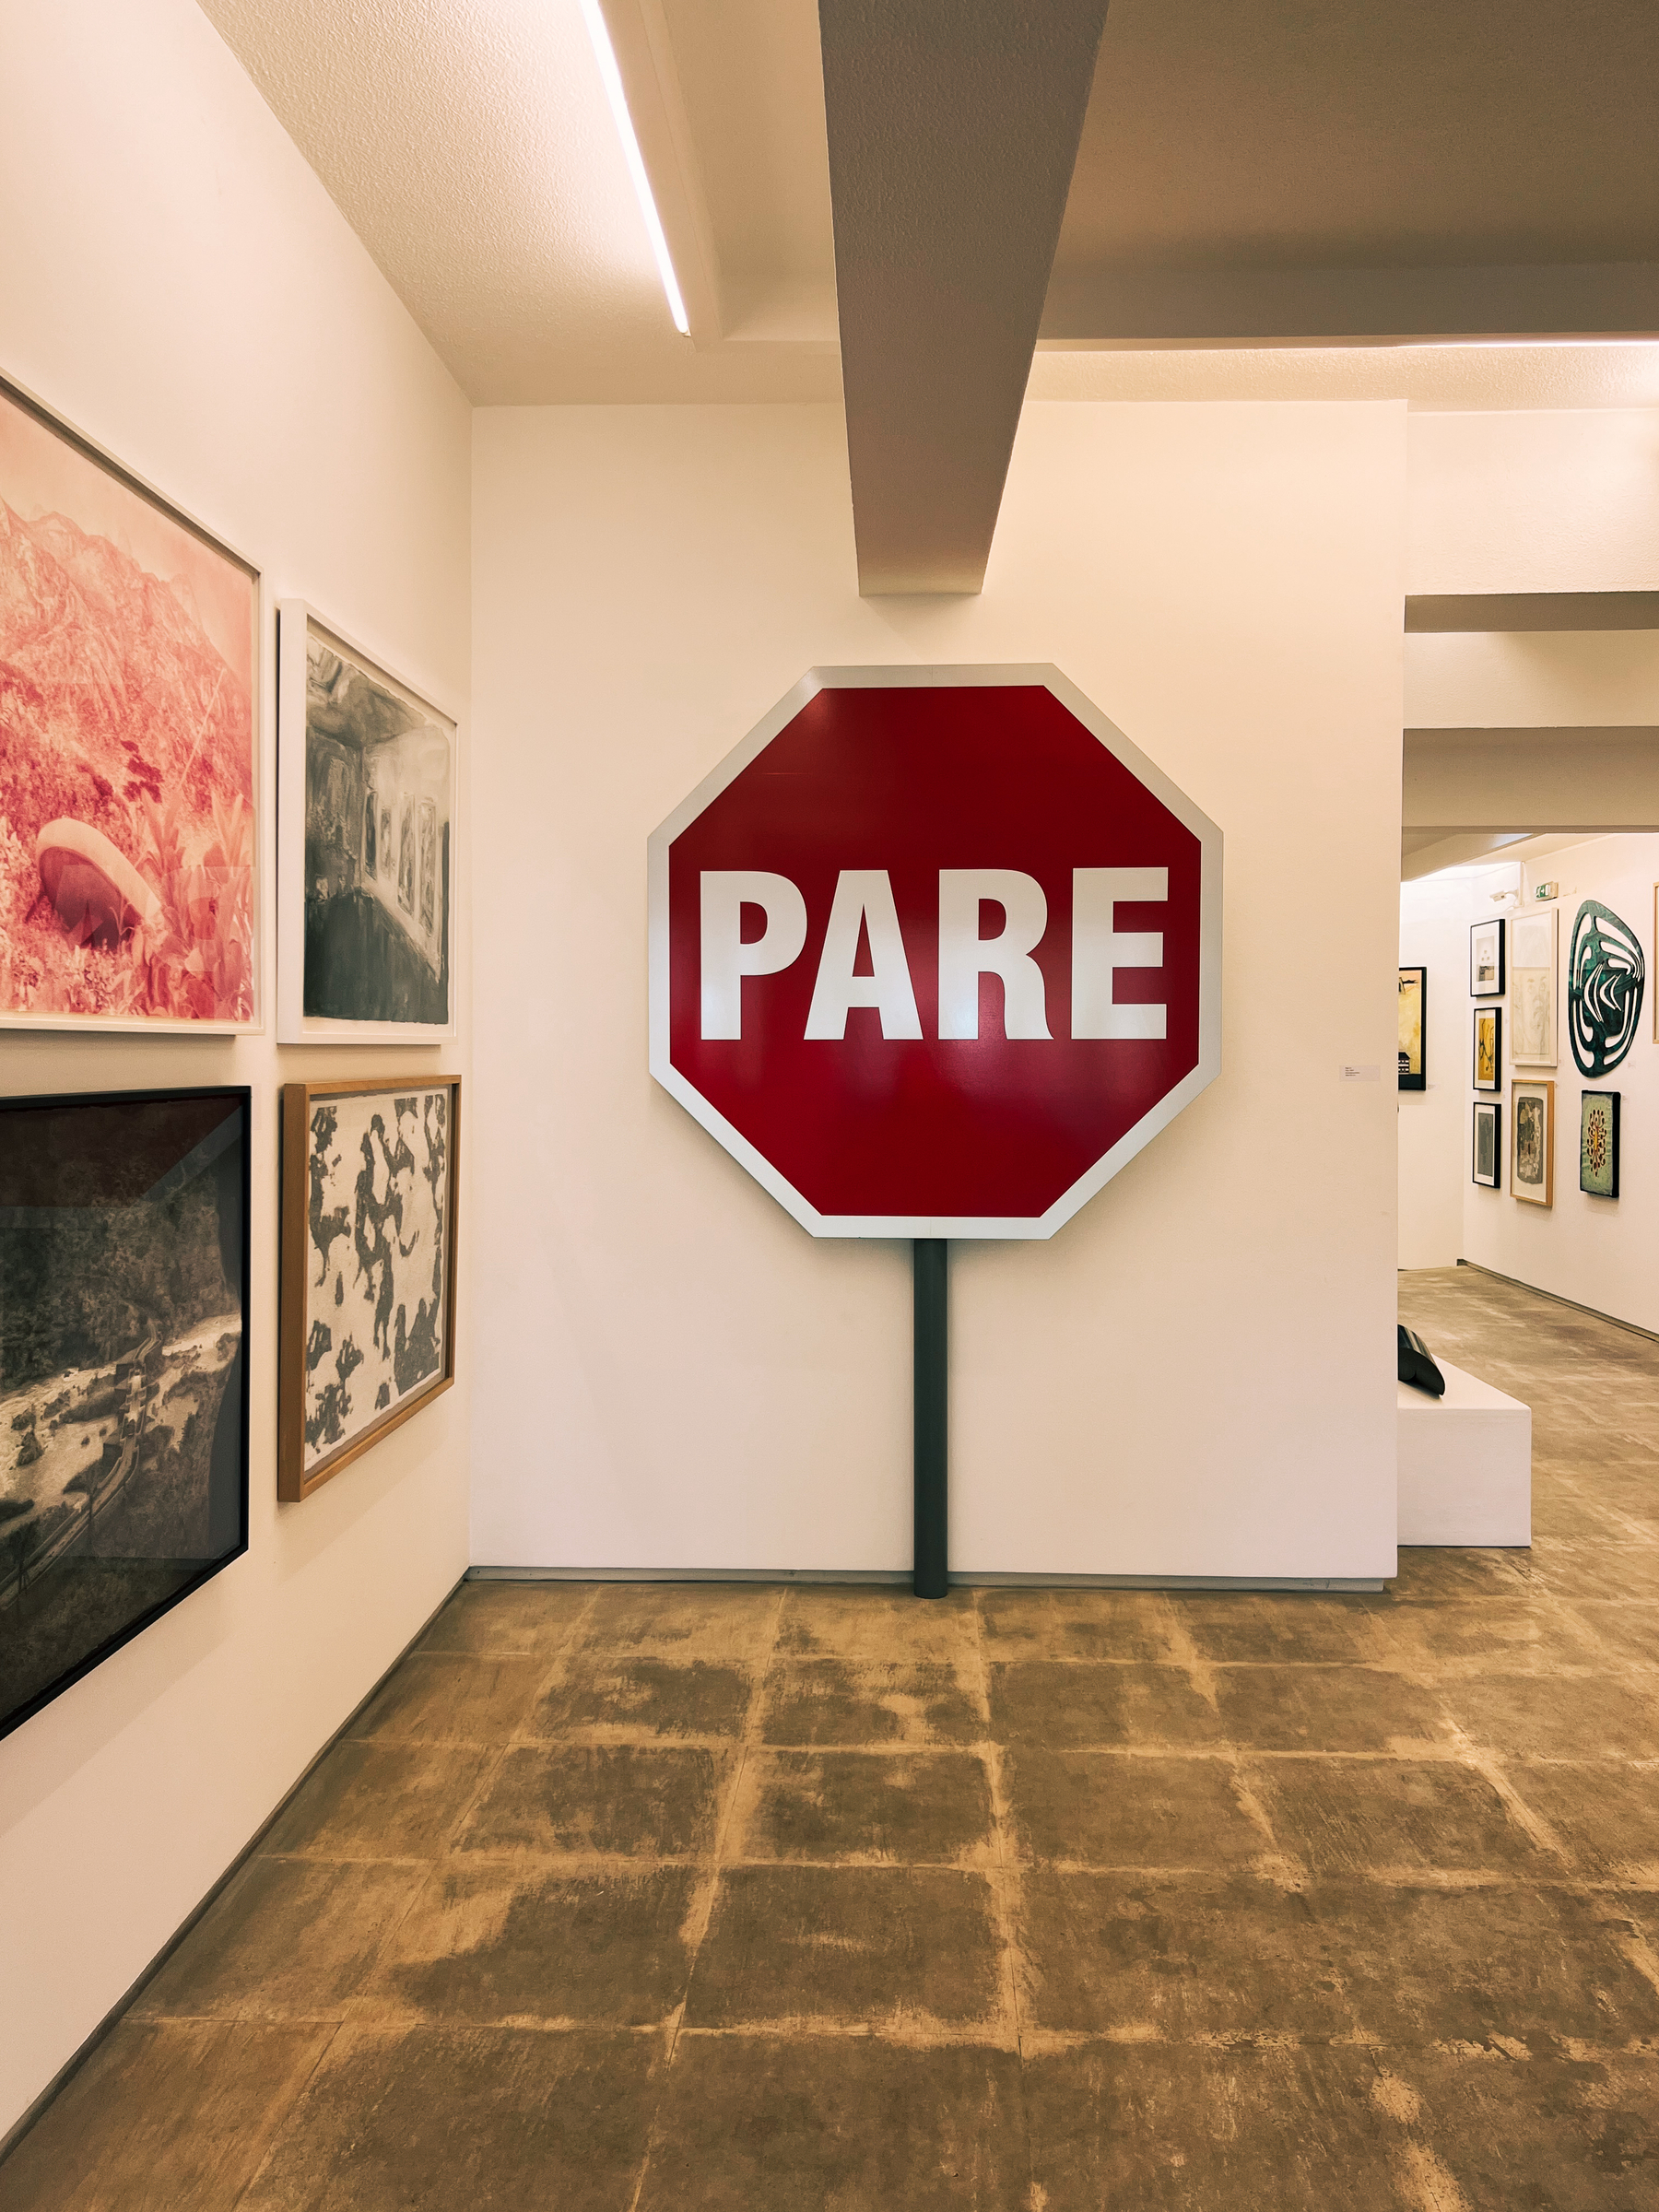 Octagonal stop sign with &ldquo;PARE&rdquo; text displayed in an art gallery with varied artwork on walls and a tiled floor.